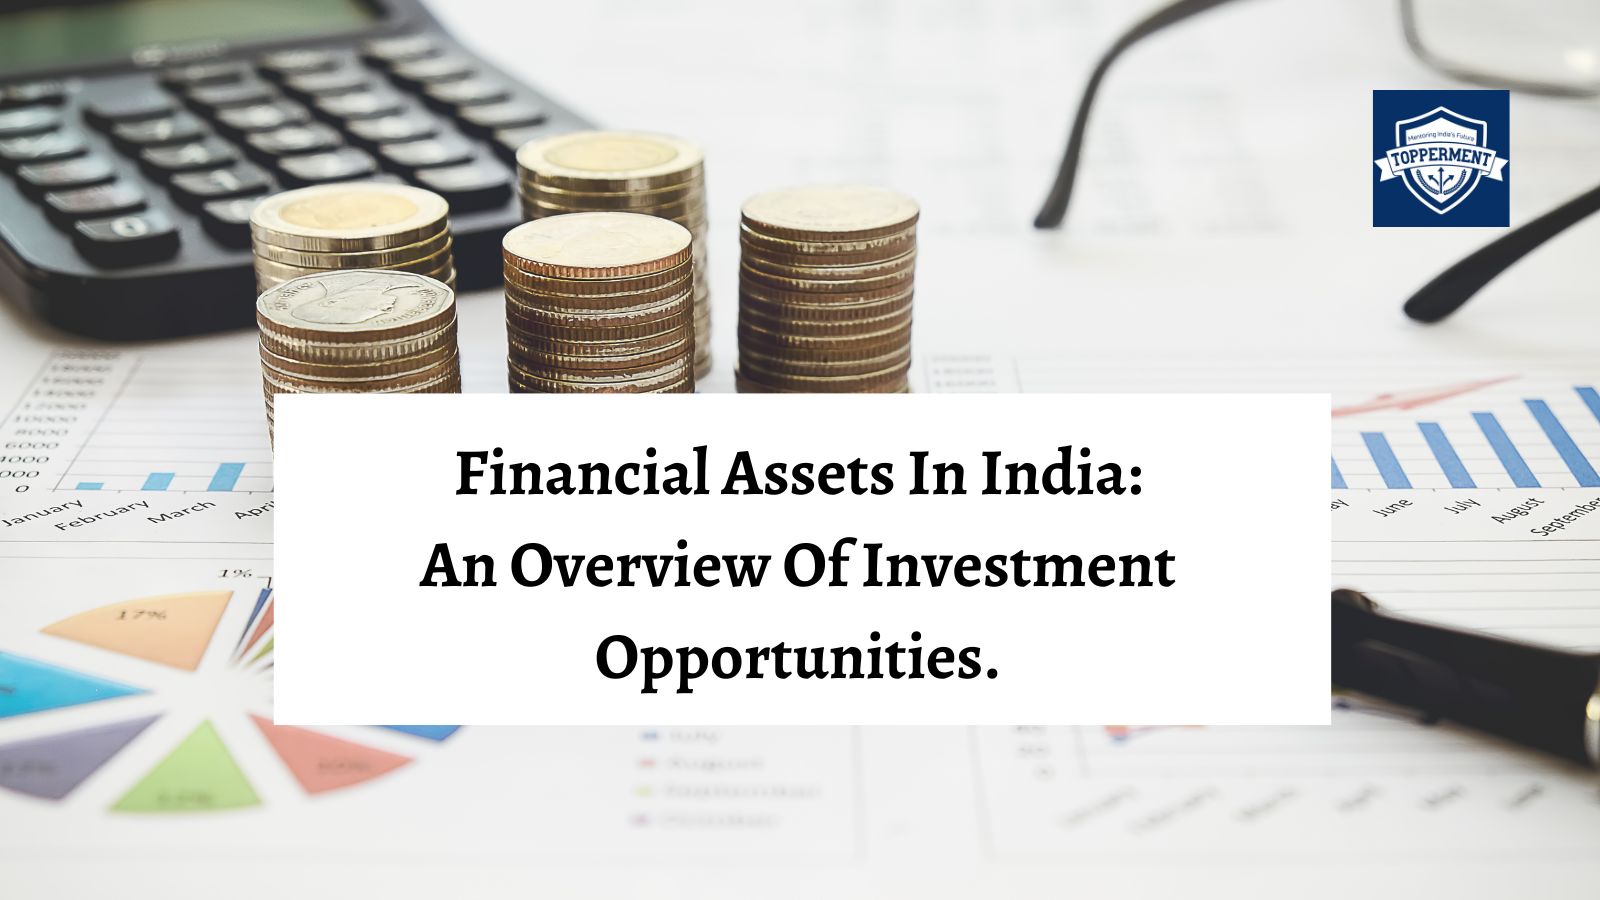 Financial Assets in India An Overview of Investment Opportunities | Best UPSC IAS Coaching For Guidance and Mentorship